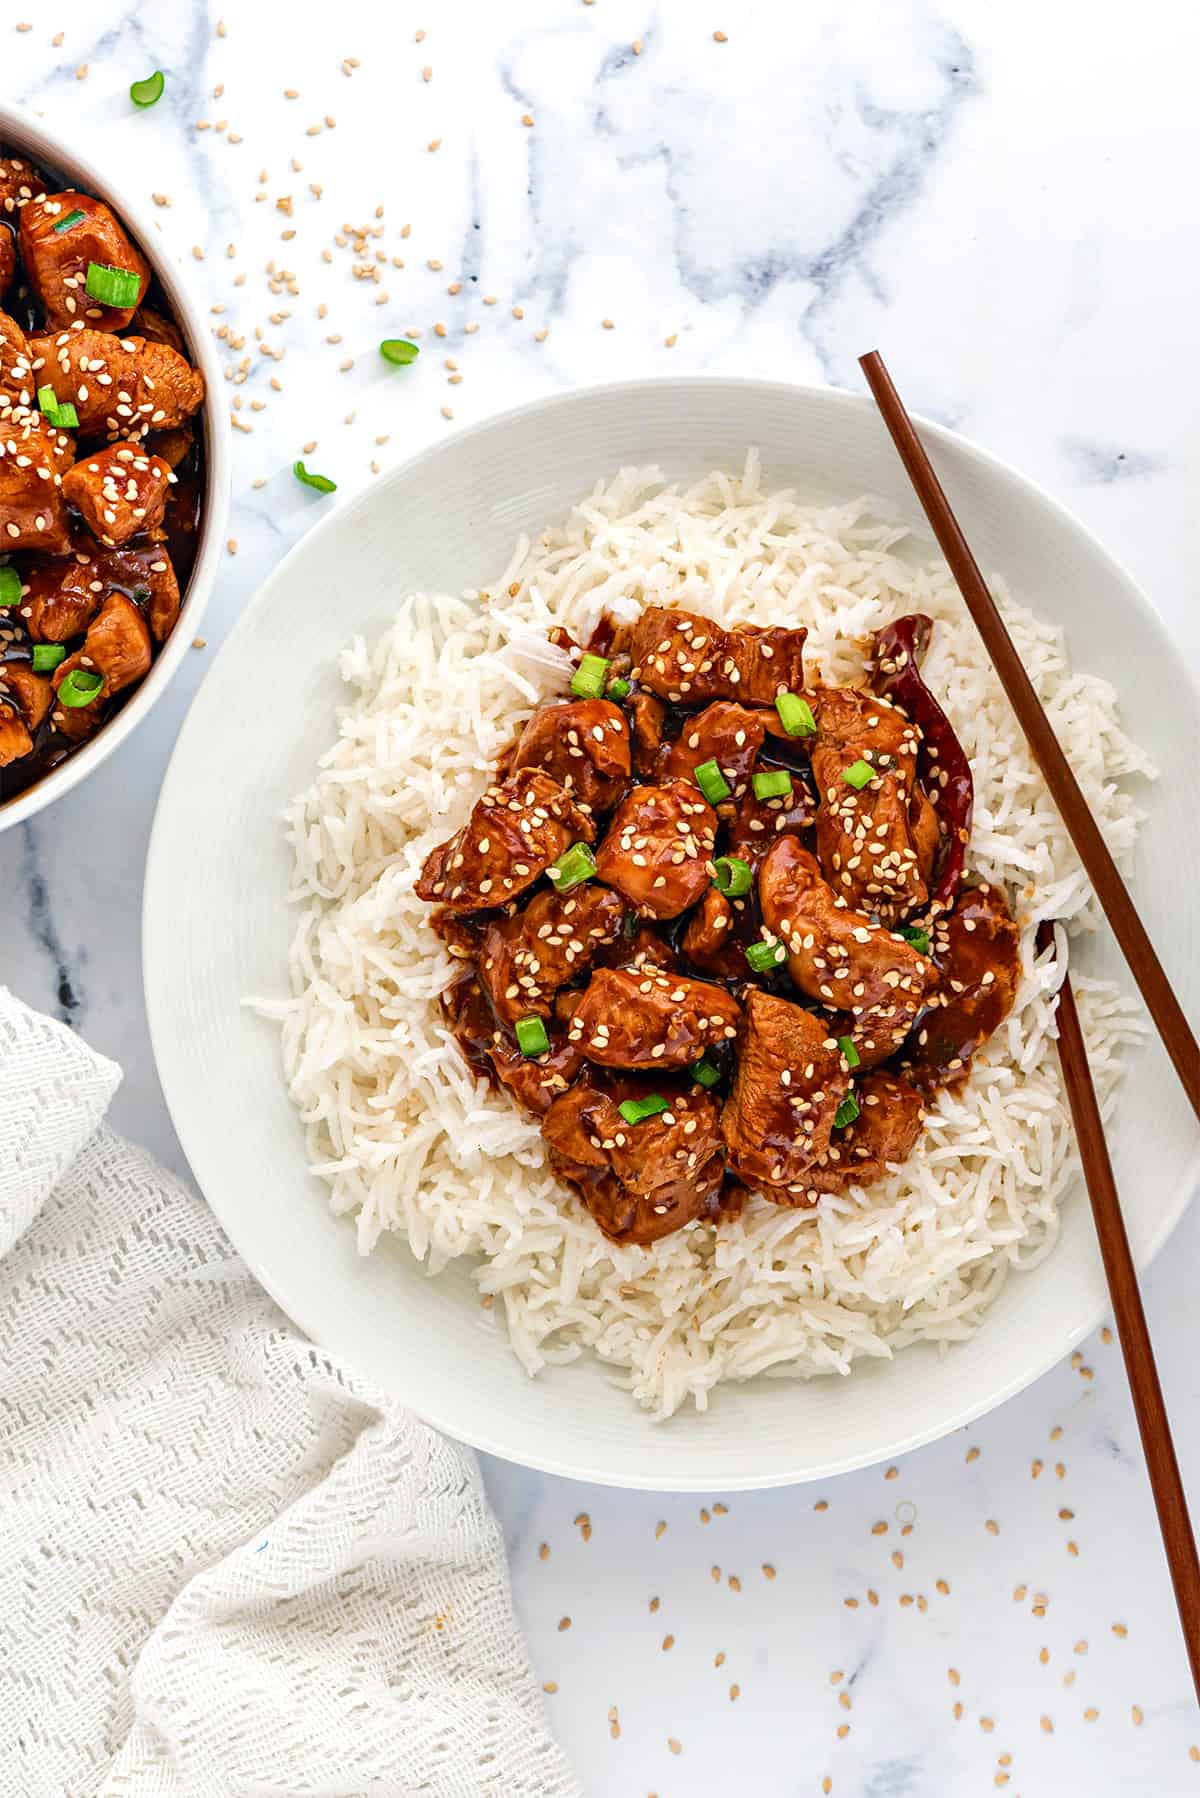 White steamed rice topped with Instant Pot General Tso's chicken gravy served in white plate.